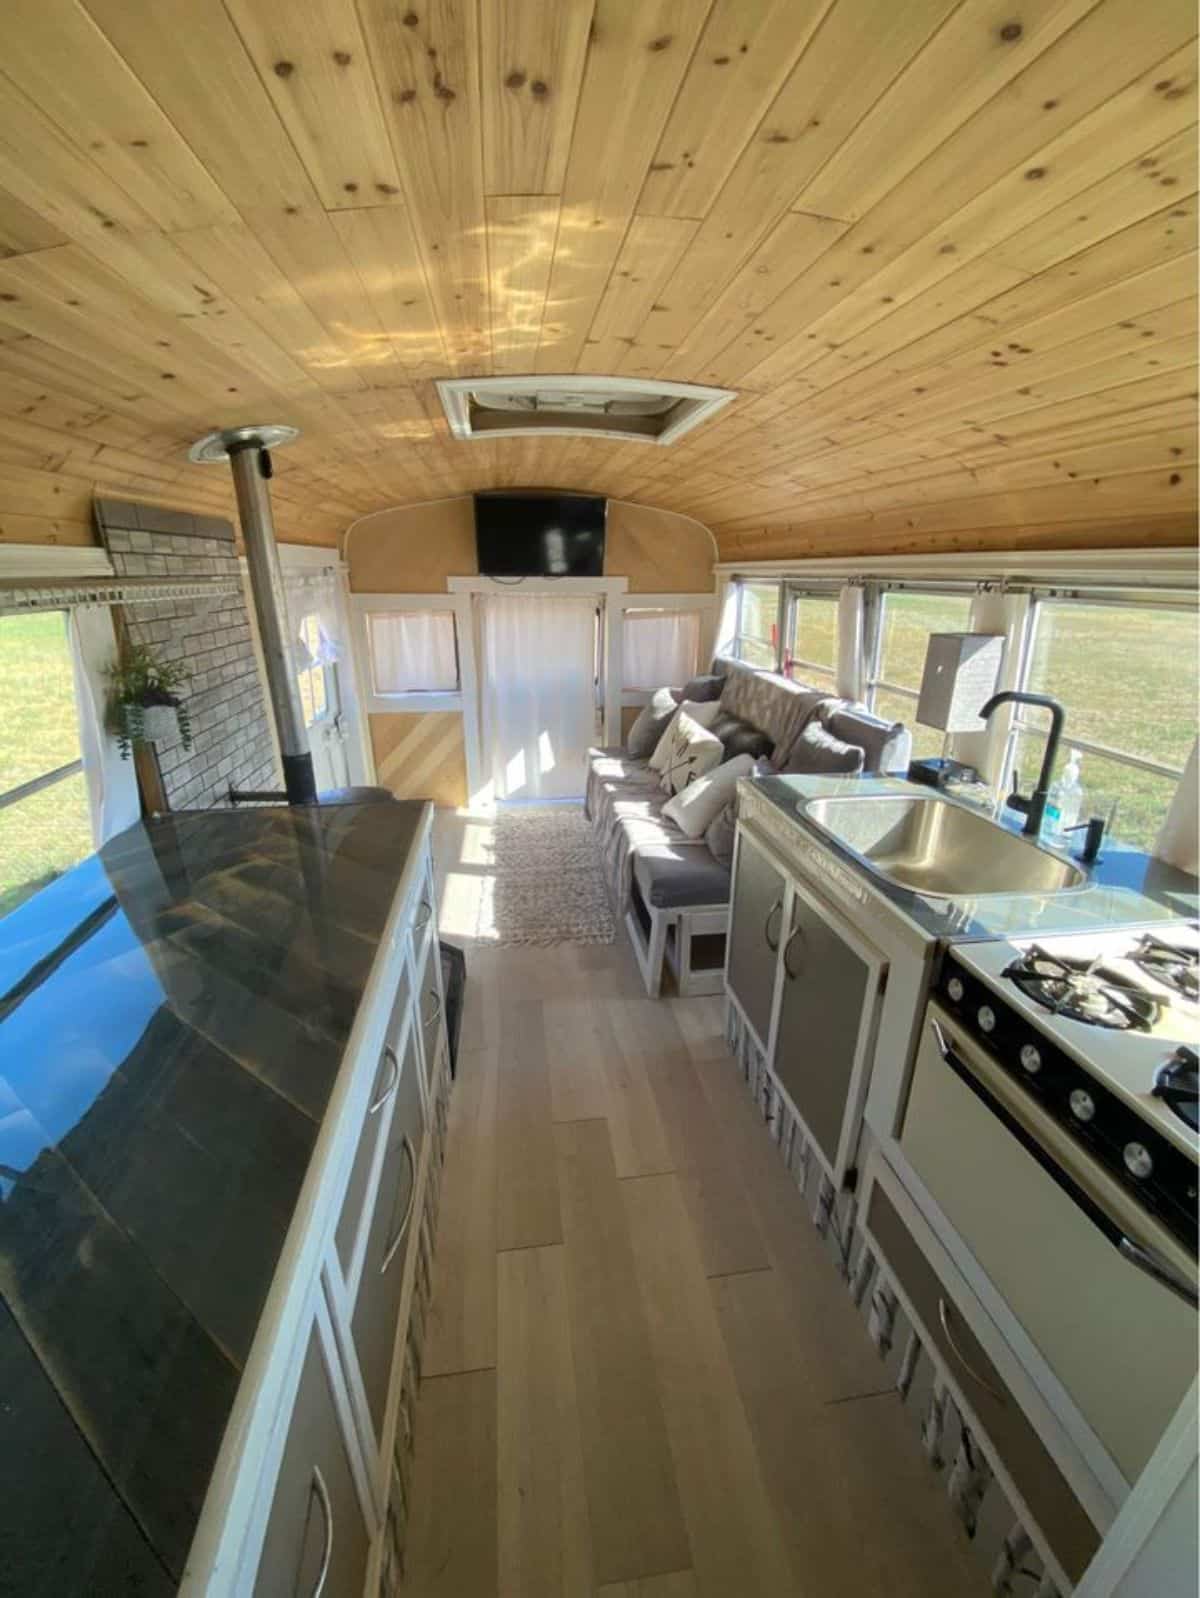 Classy wooden interior of 40' Skoolie Tiny House on wheels from bedroom view